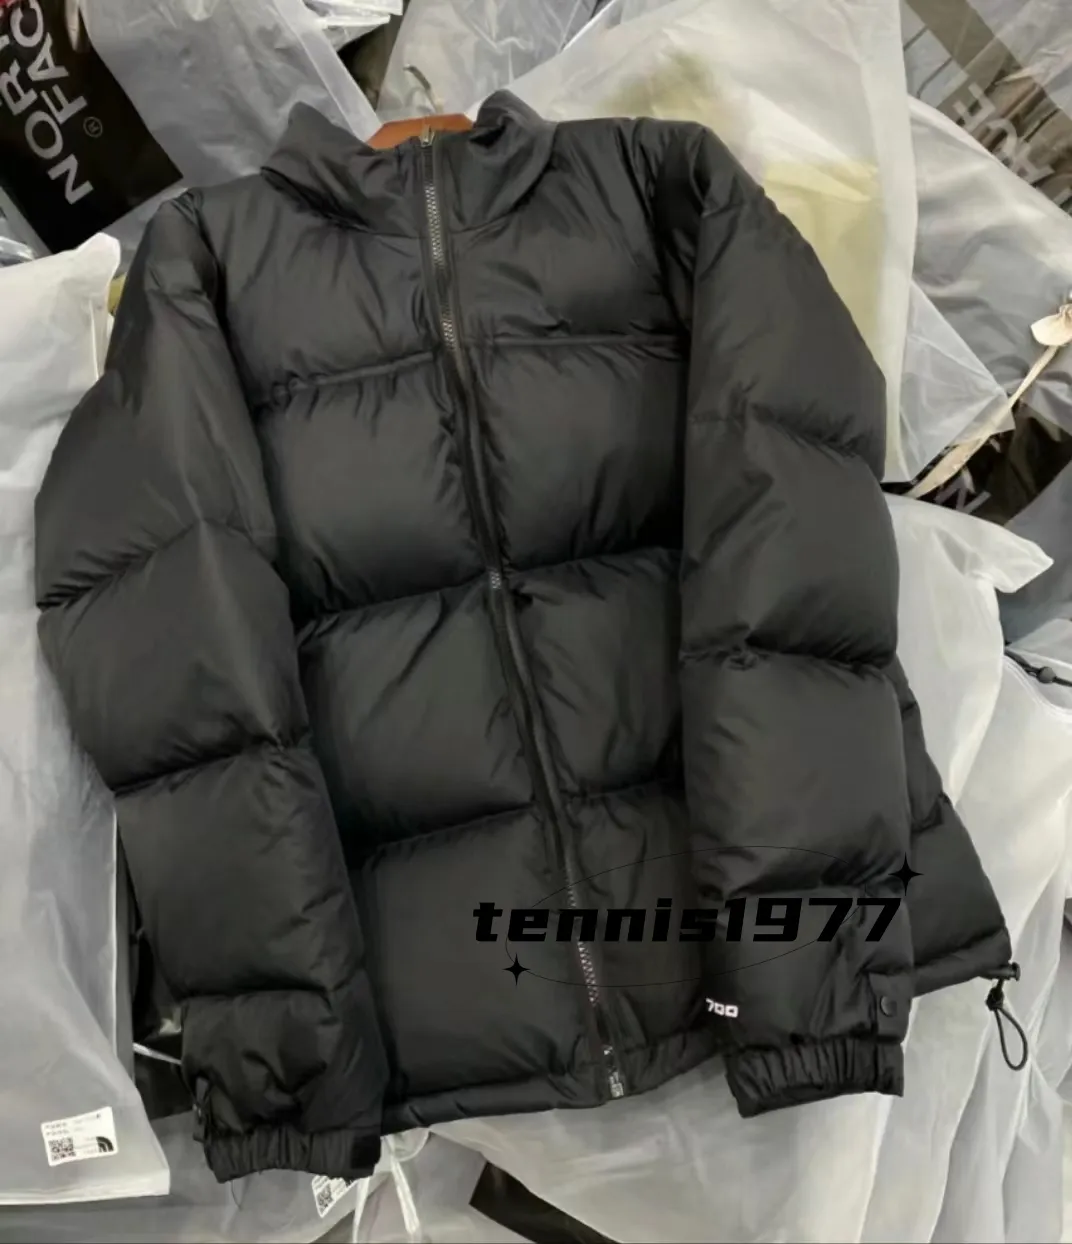 Mens Cotton Womens down Jacket Winter jacket Coat Outdoor Fashion Classic Casual Warm Unisex Zippers Tops Windproof Cold protection Outwear Size S/M/L/XL/2XL/3XL